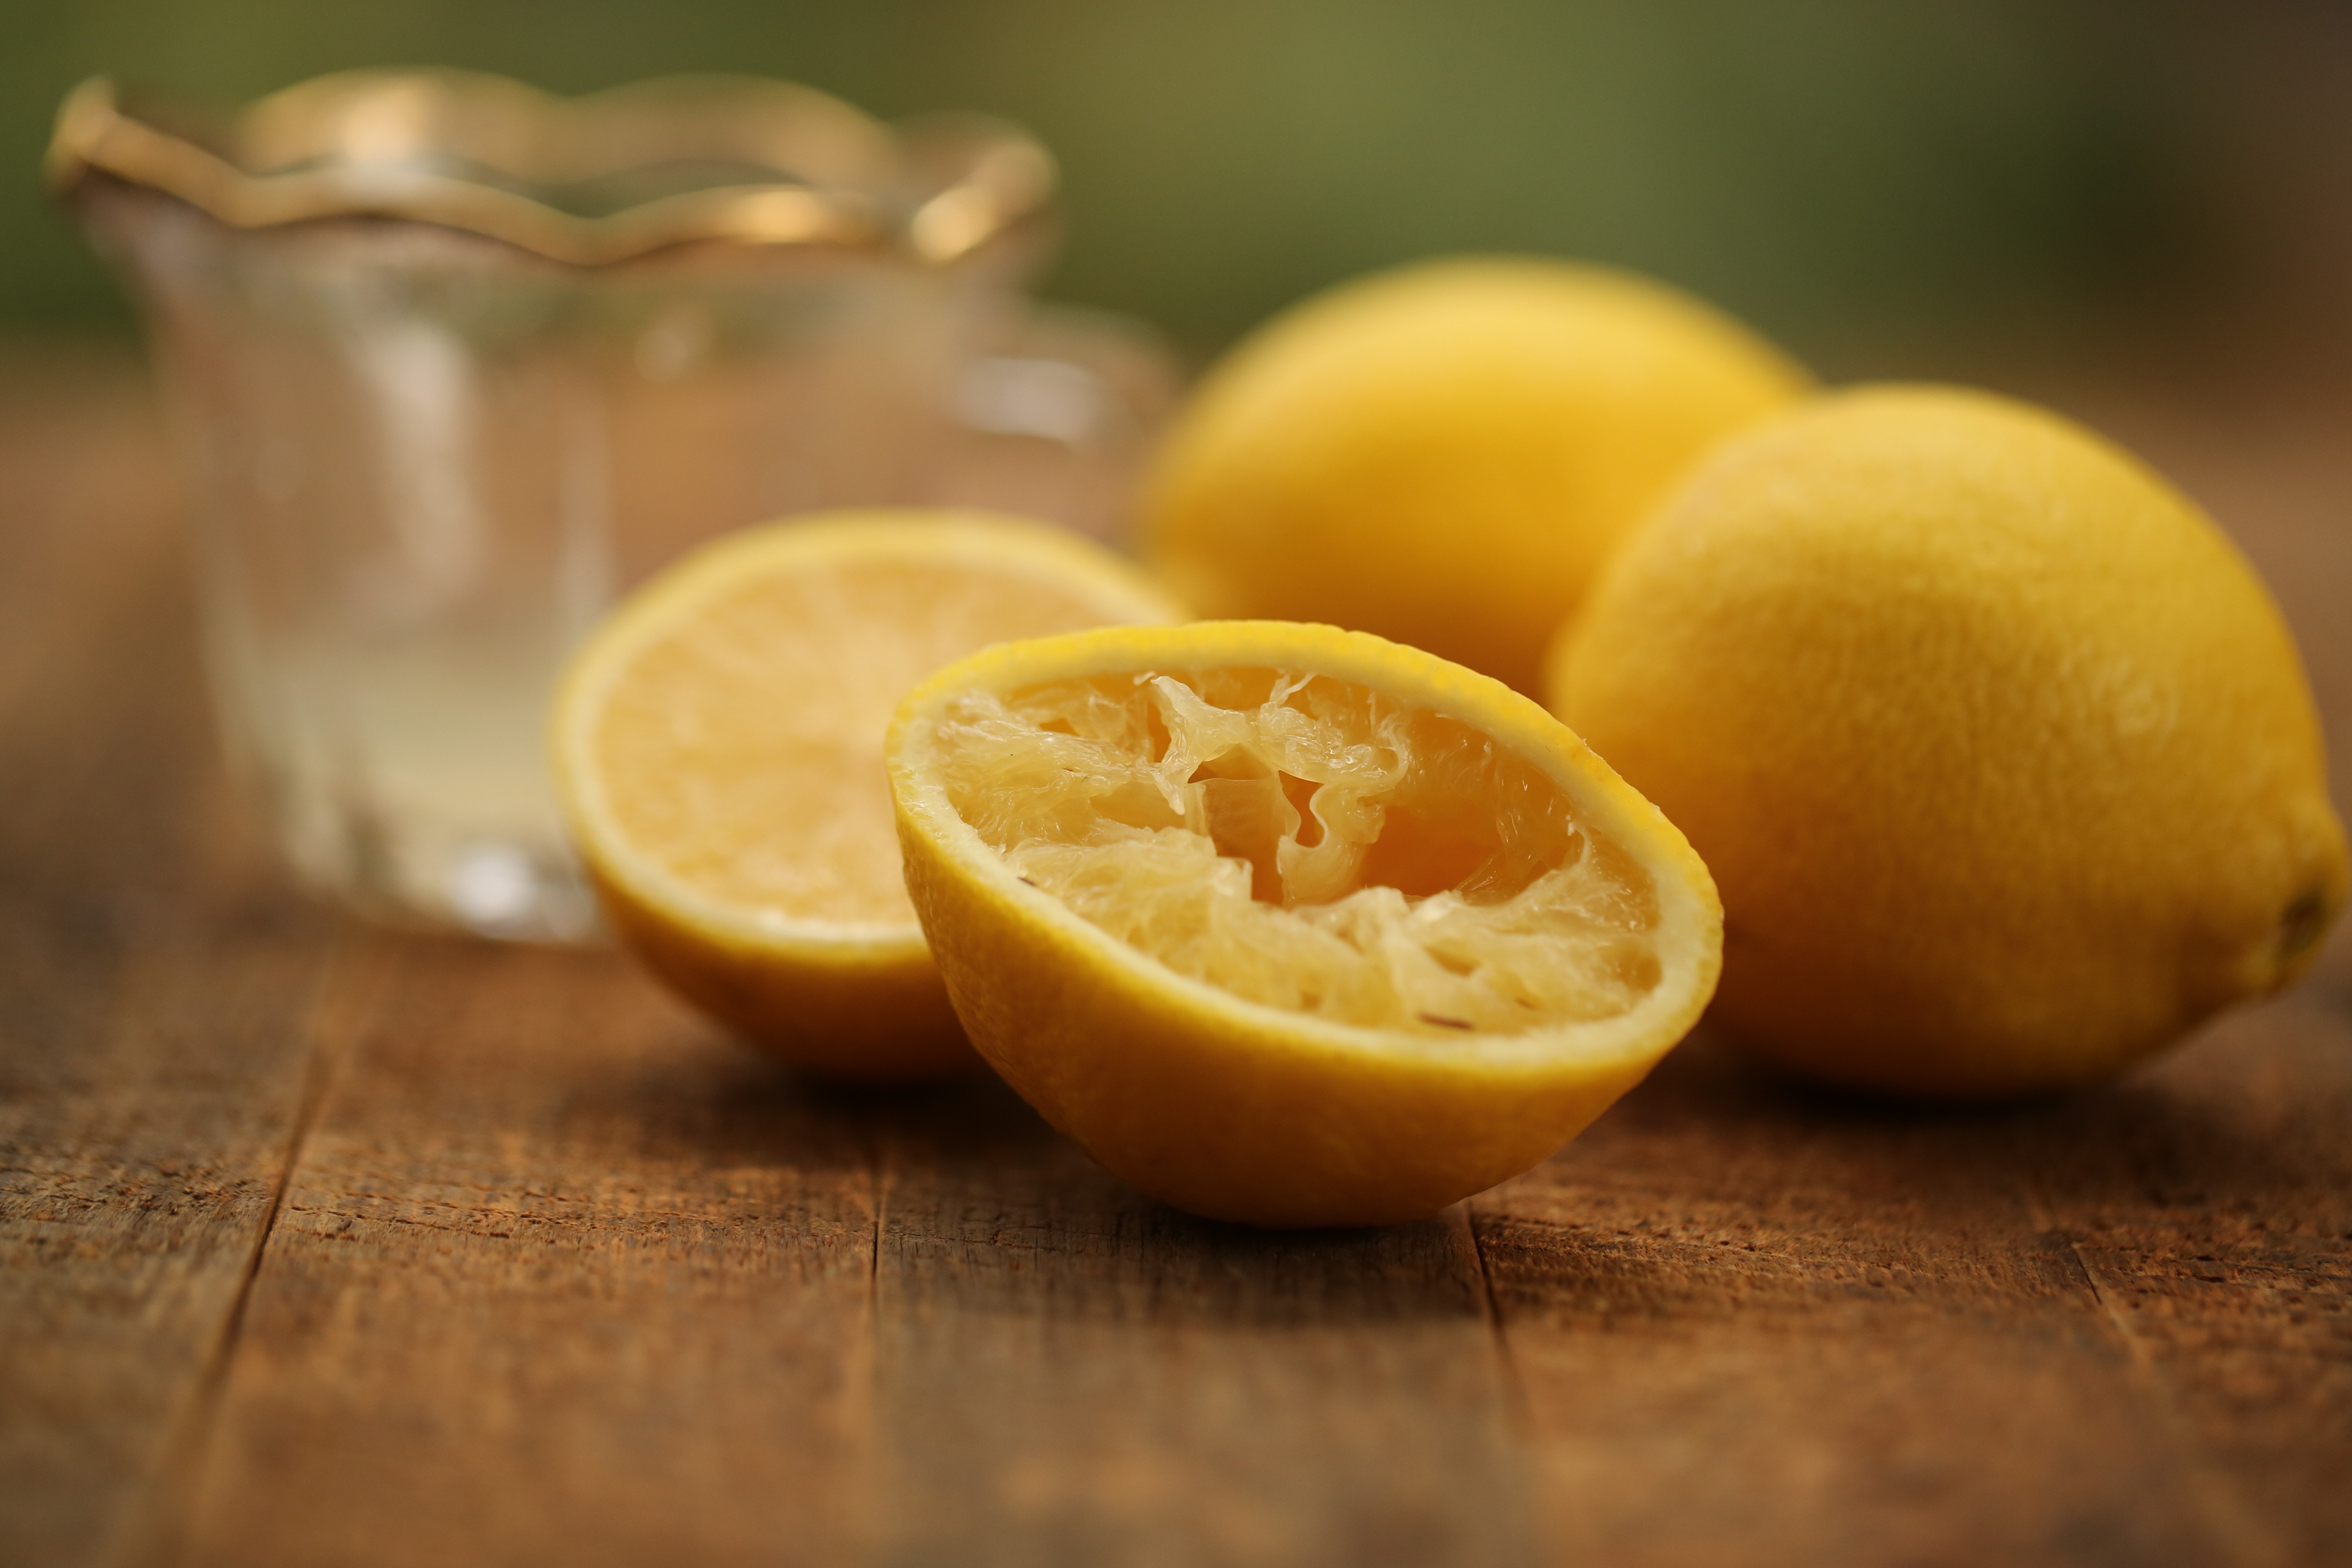 Healing, Cleaning and Cooking Power of Lemons